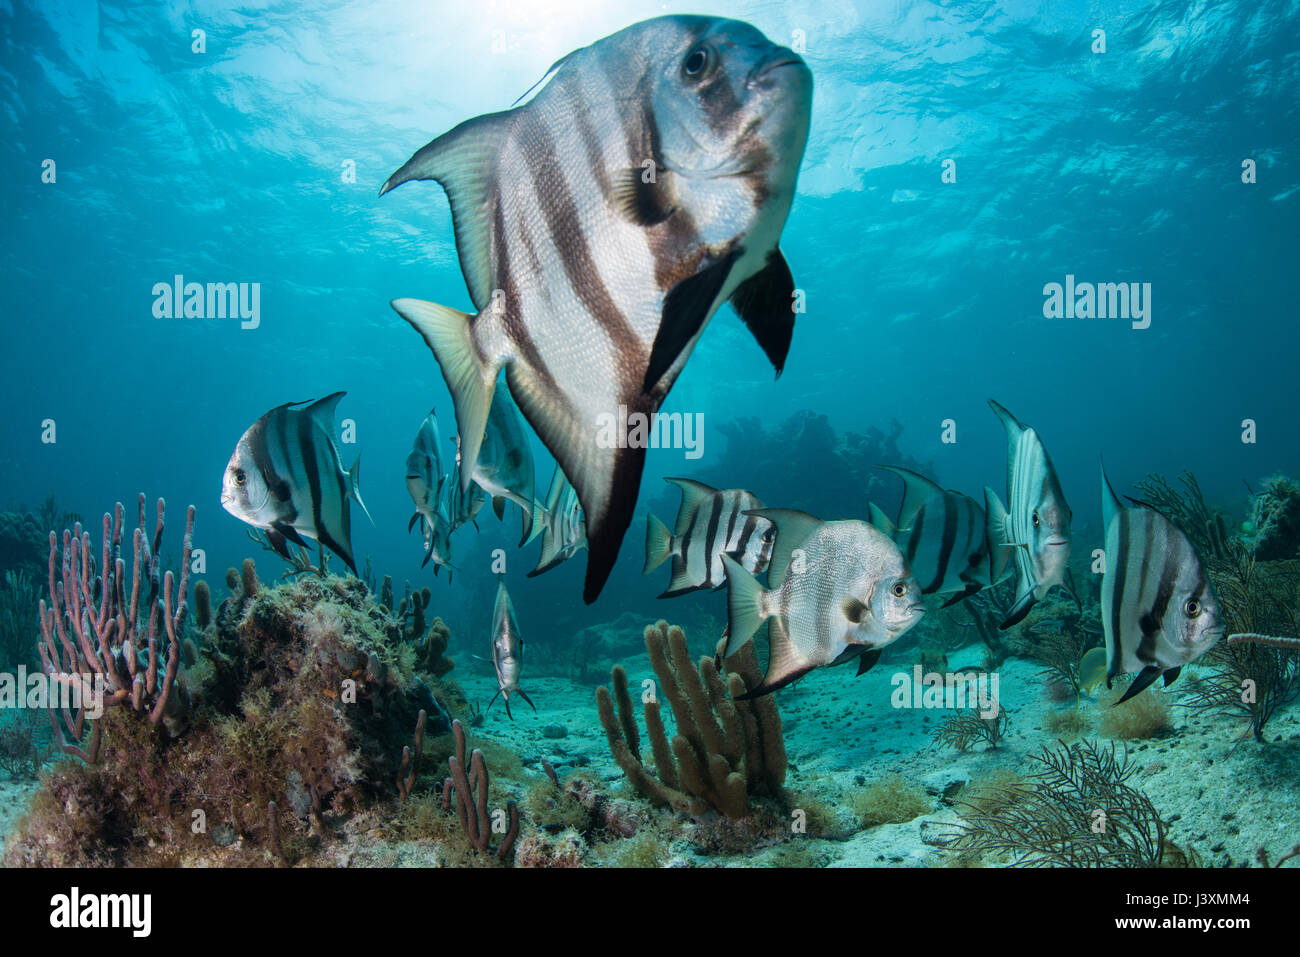 School of spadefish (chaetodipterus faber) by coral reef, Puerto Morelos, Mexico Stock Photo